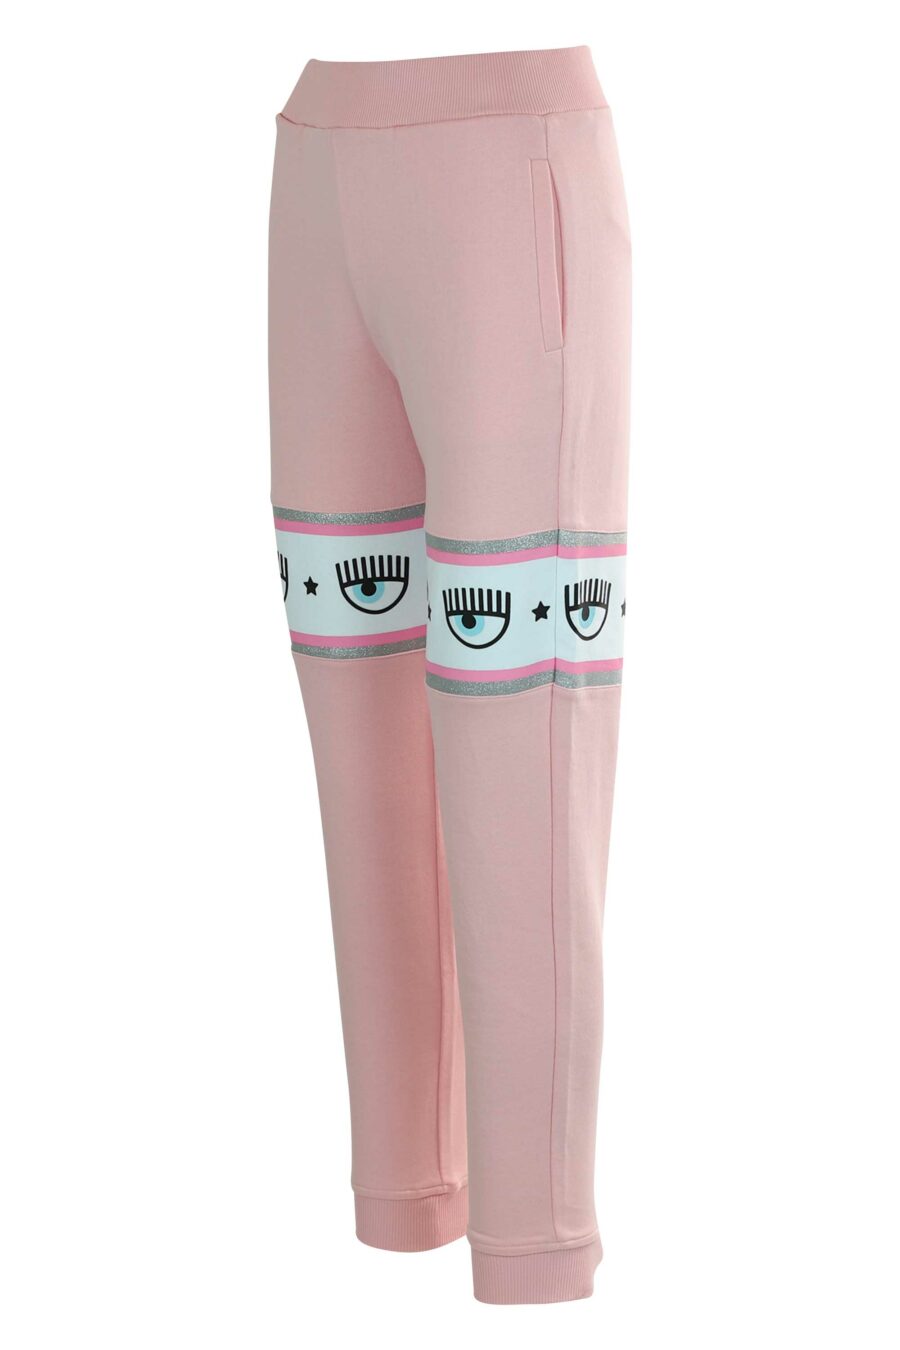 Pink tracksuit bottoms with hood and white and silver ribbon logo" - 8052672419163 2